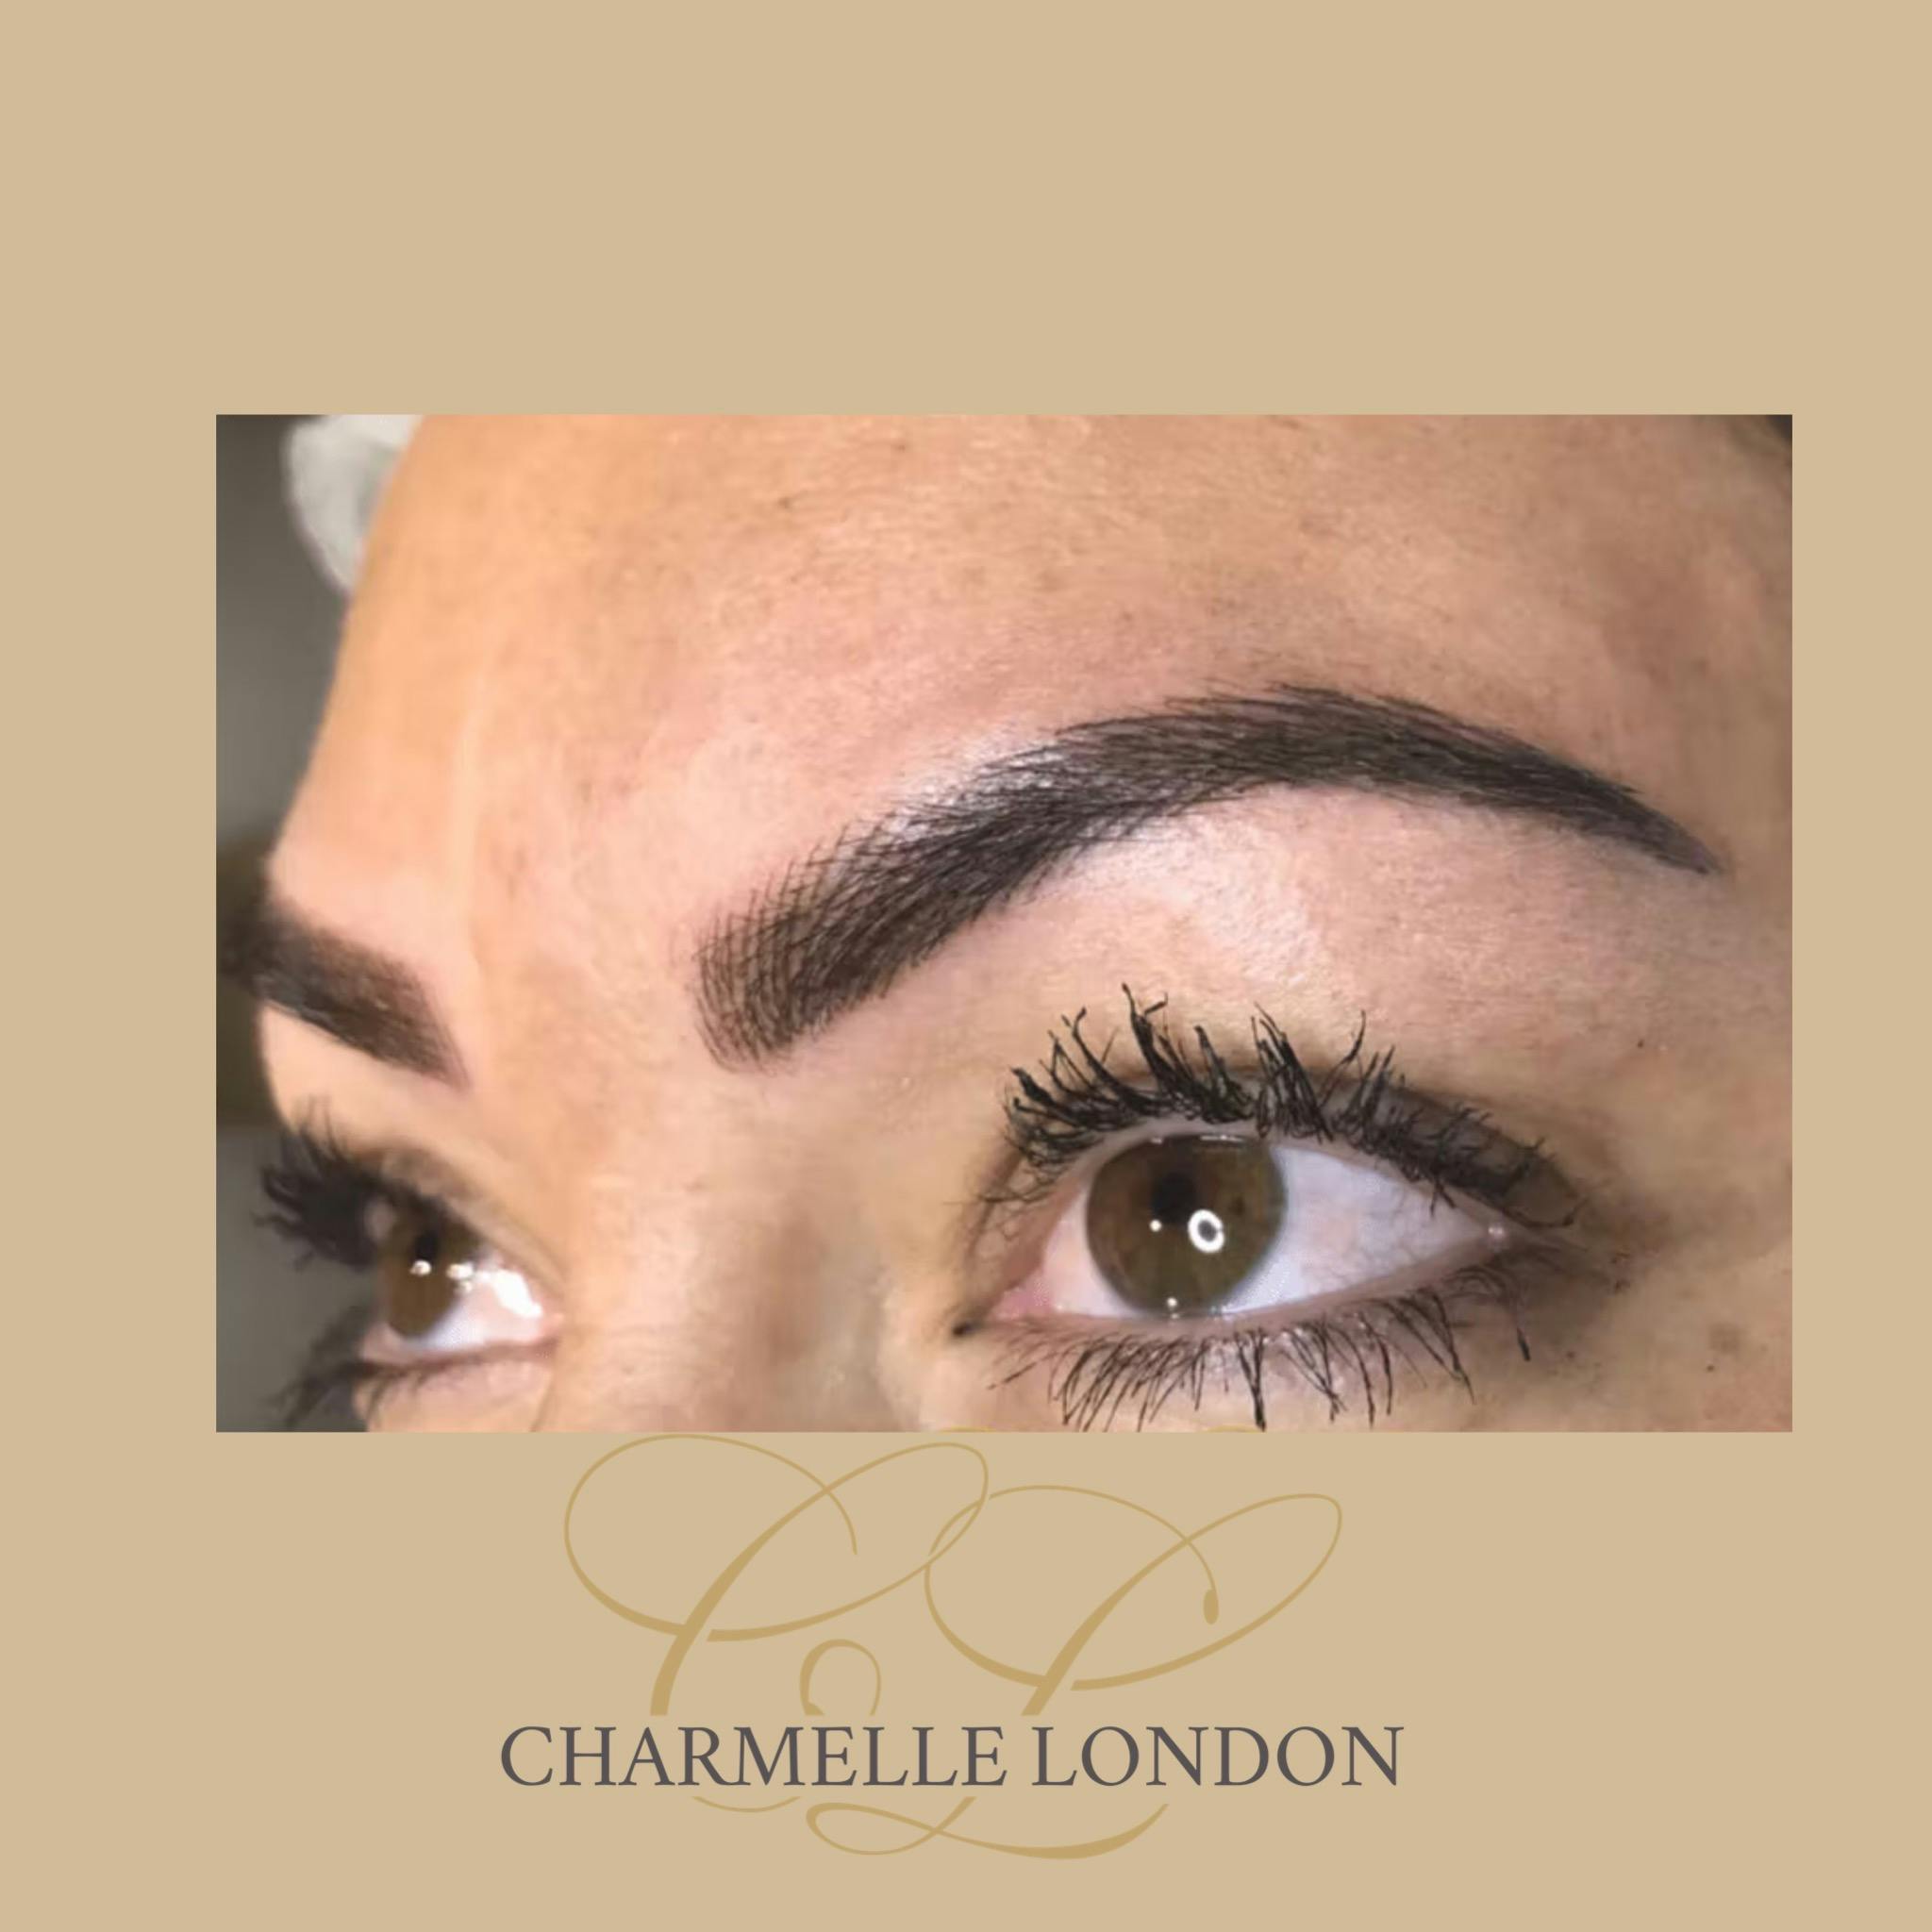 unse via beundring Get the Permanent Makeup Look You've Always Wanted | Charmelle London